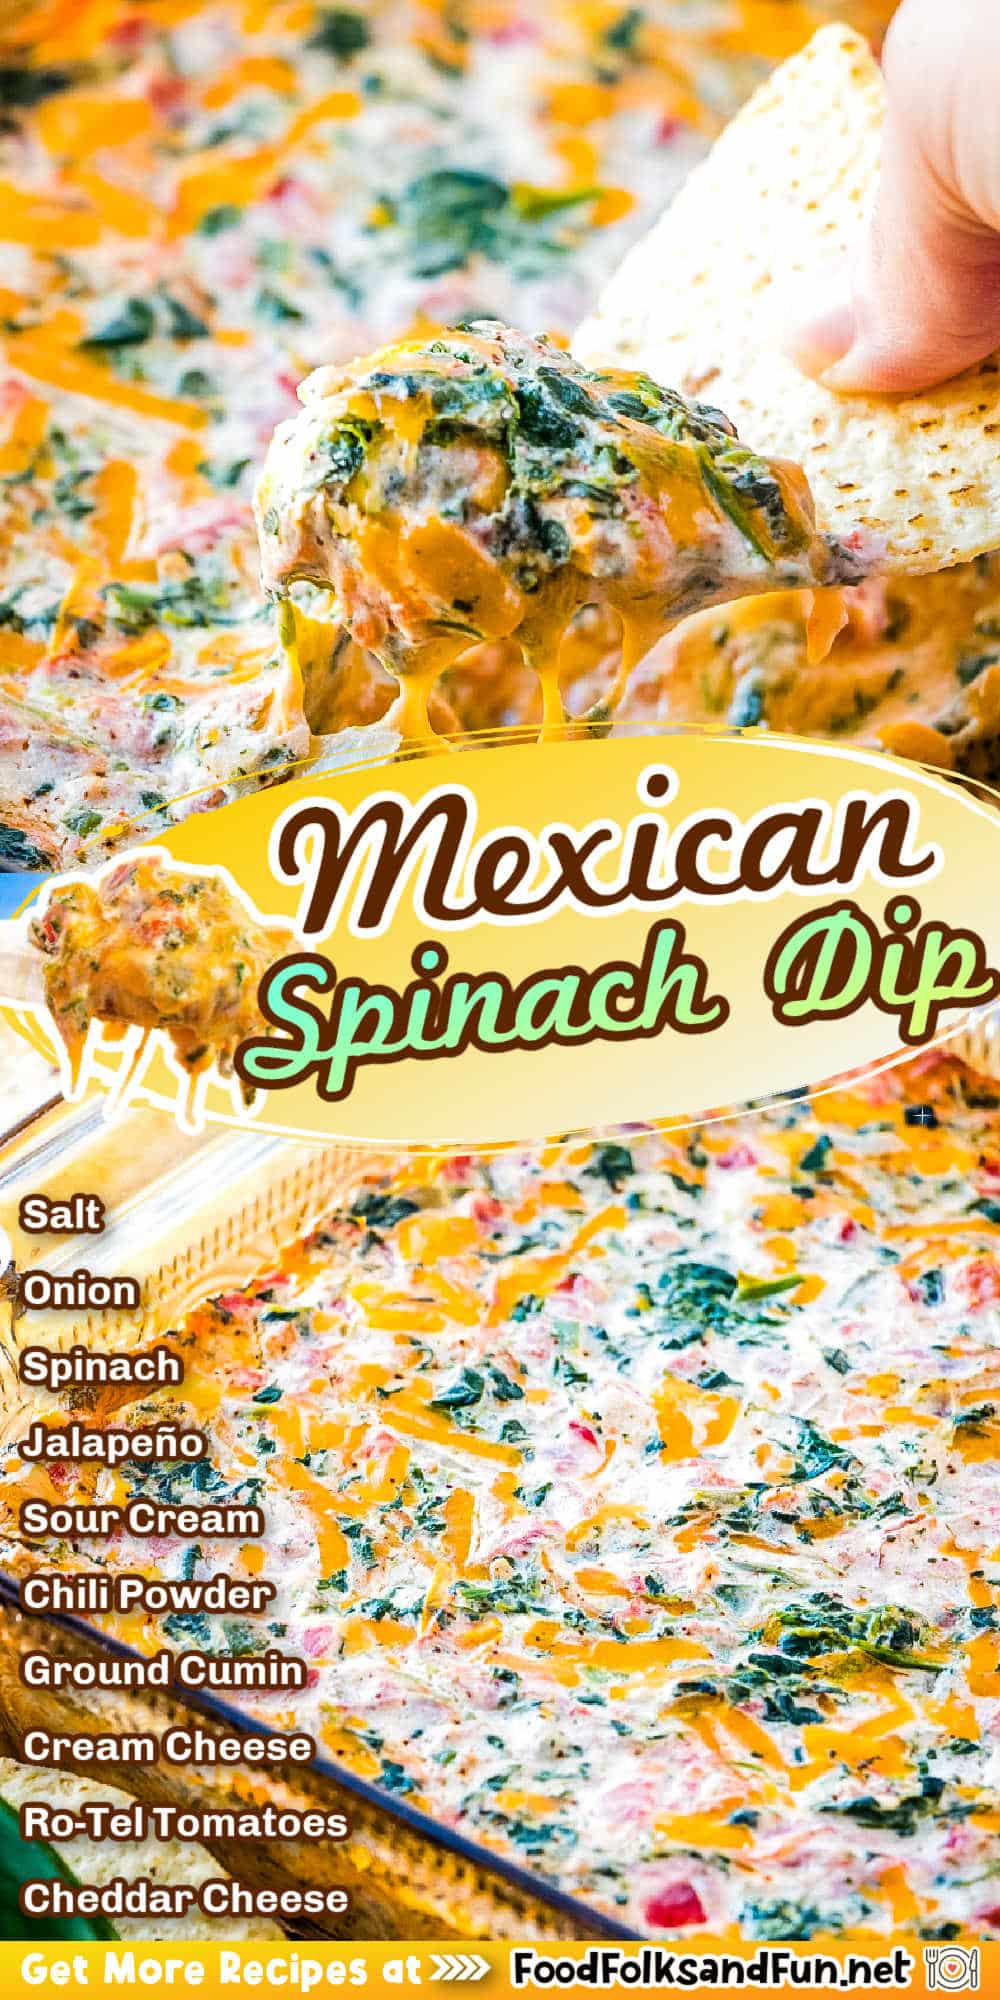 Say goodbye to boring dips! This Mexican Spinach Dip is your new hero. Creamy spinach, smoky peppers, and a touch of spice – it's addictive at every bite. via @foodfolksandfun